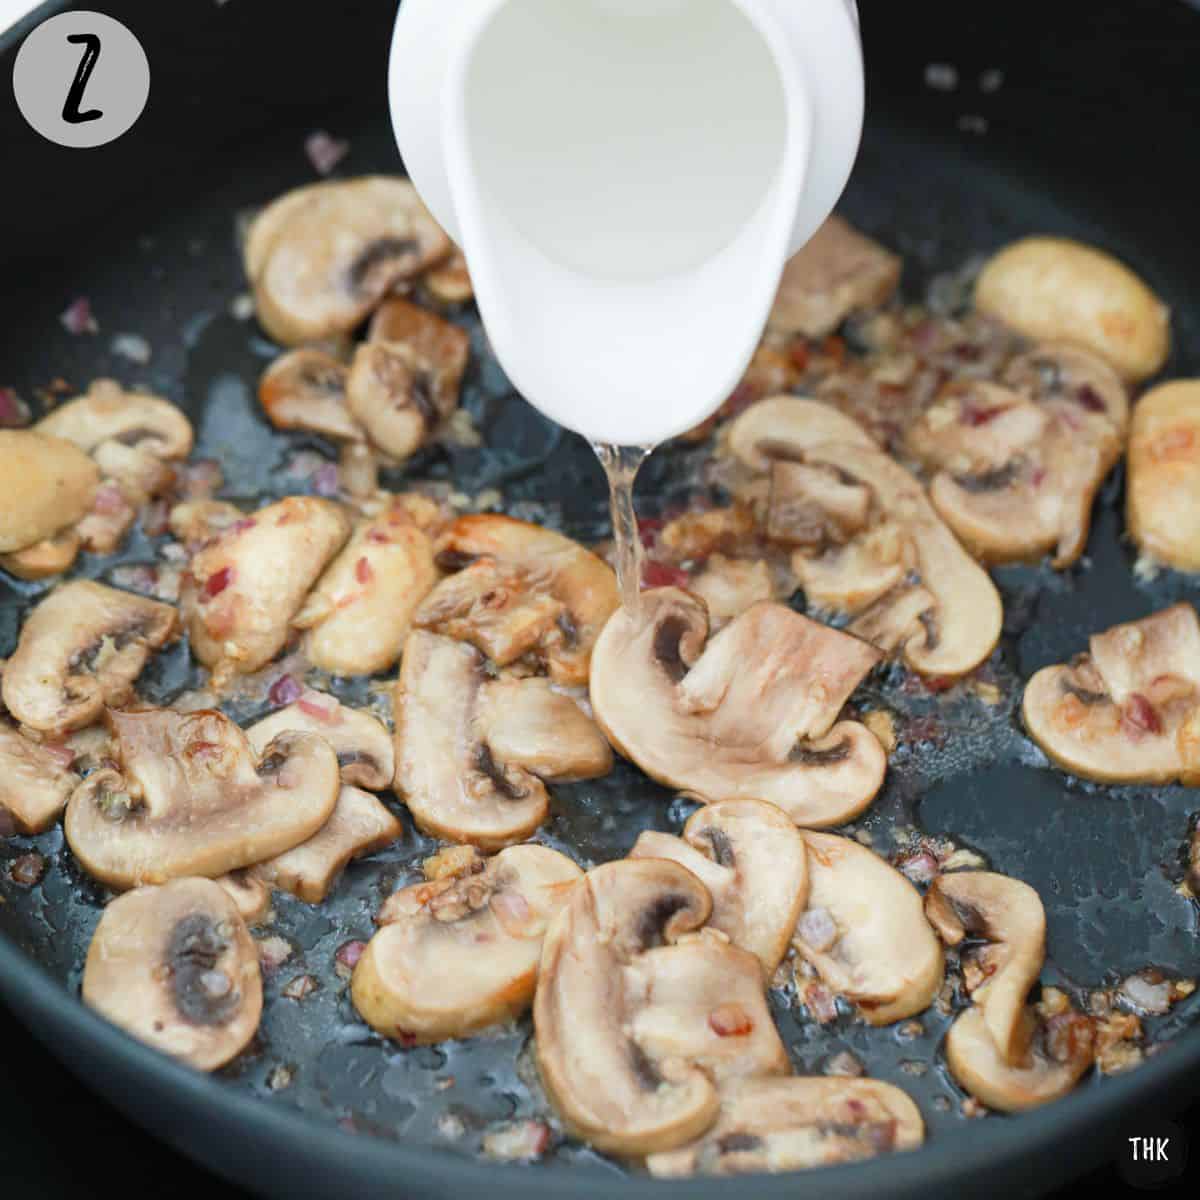 Vodka being poured into skillet of sauted mushrooms and shallots.